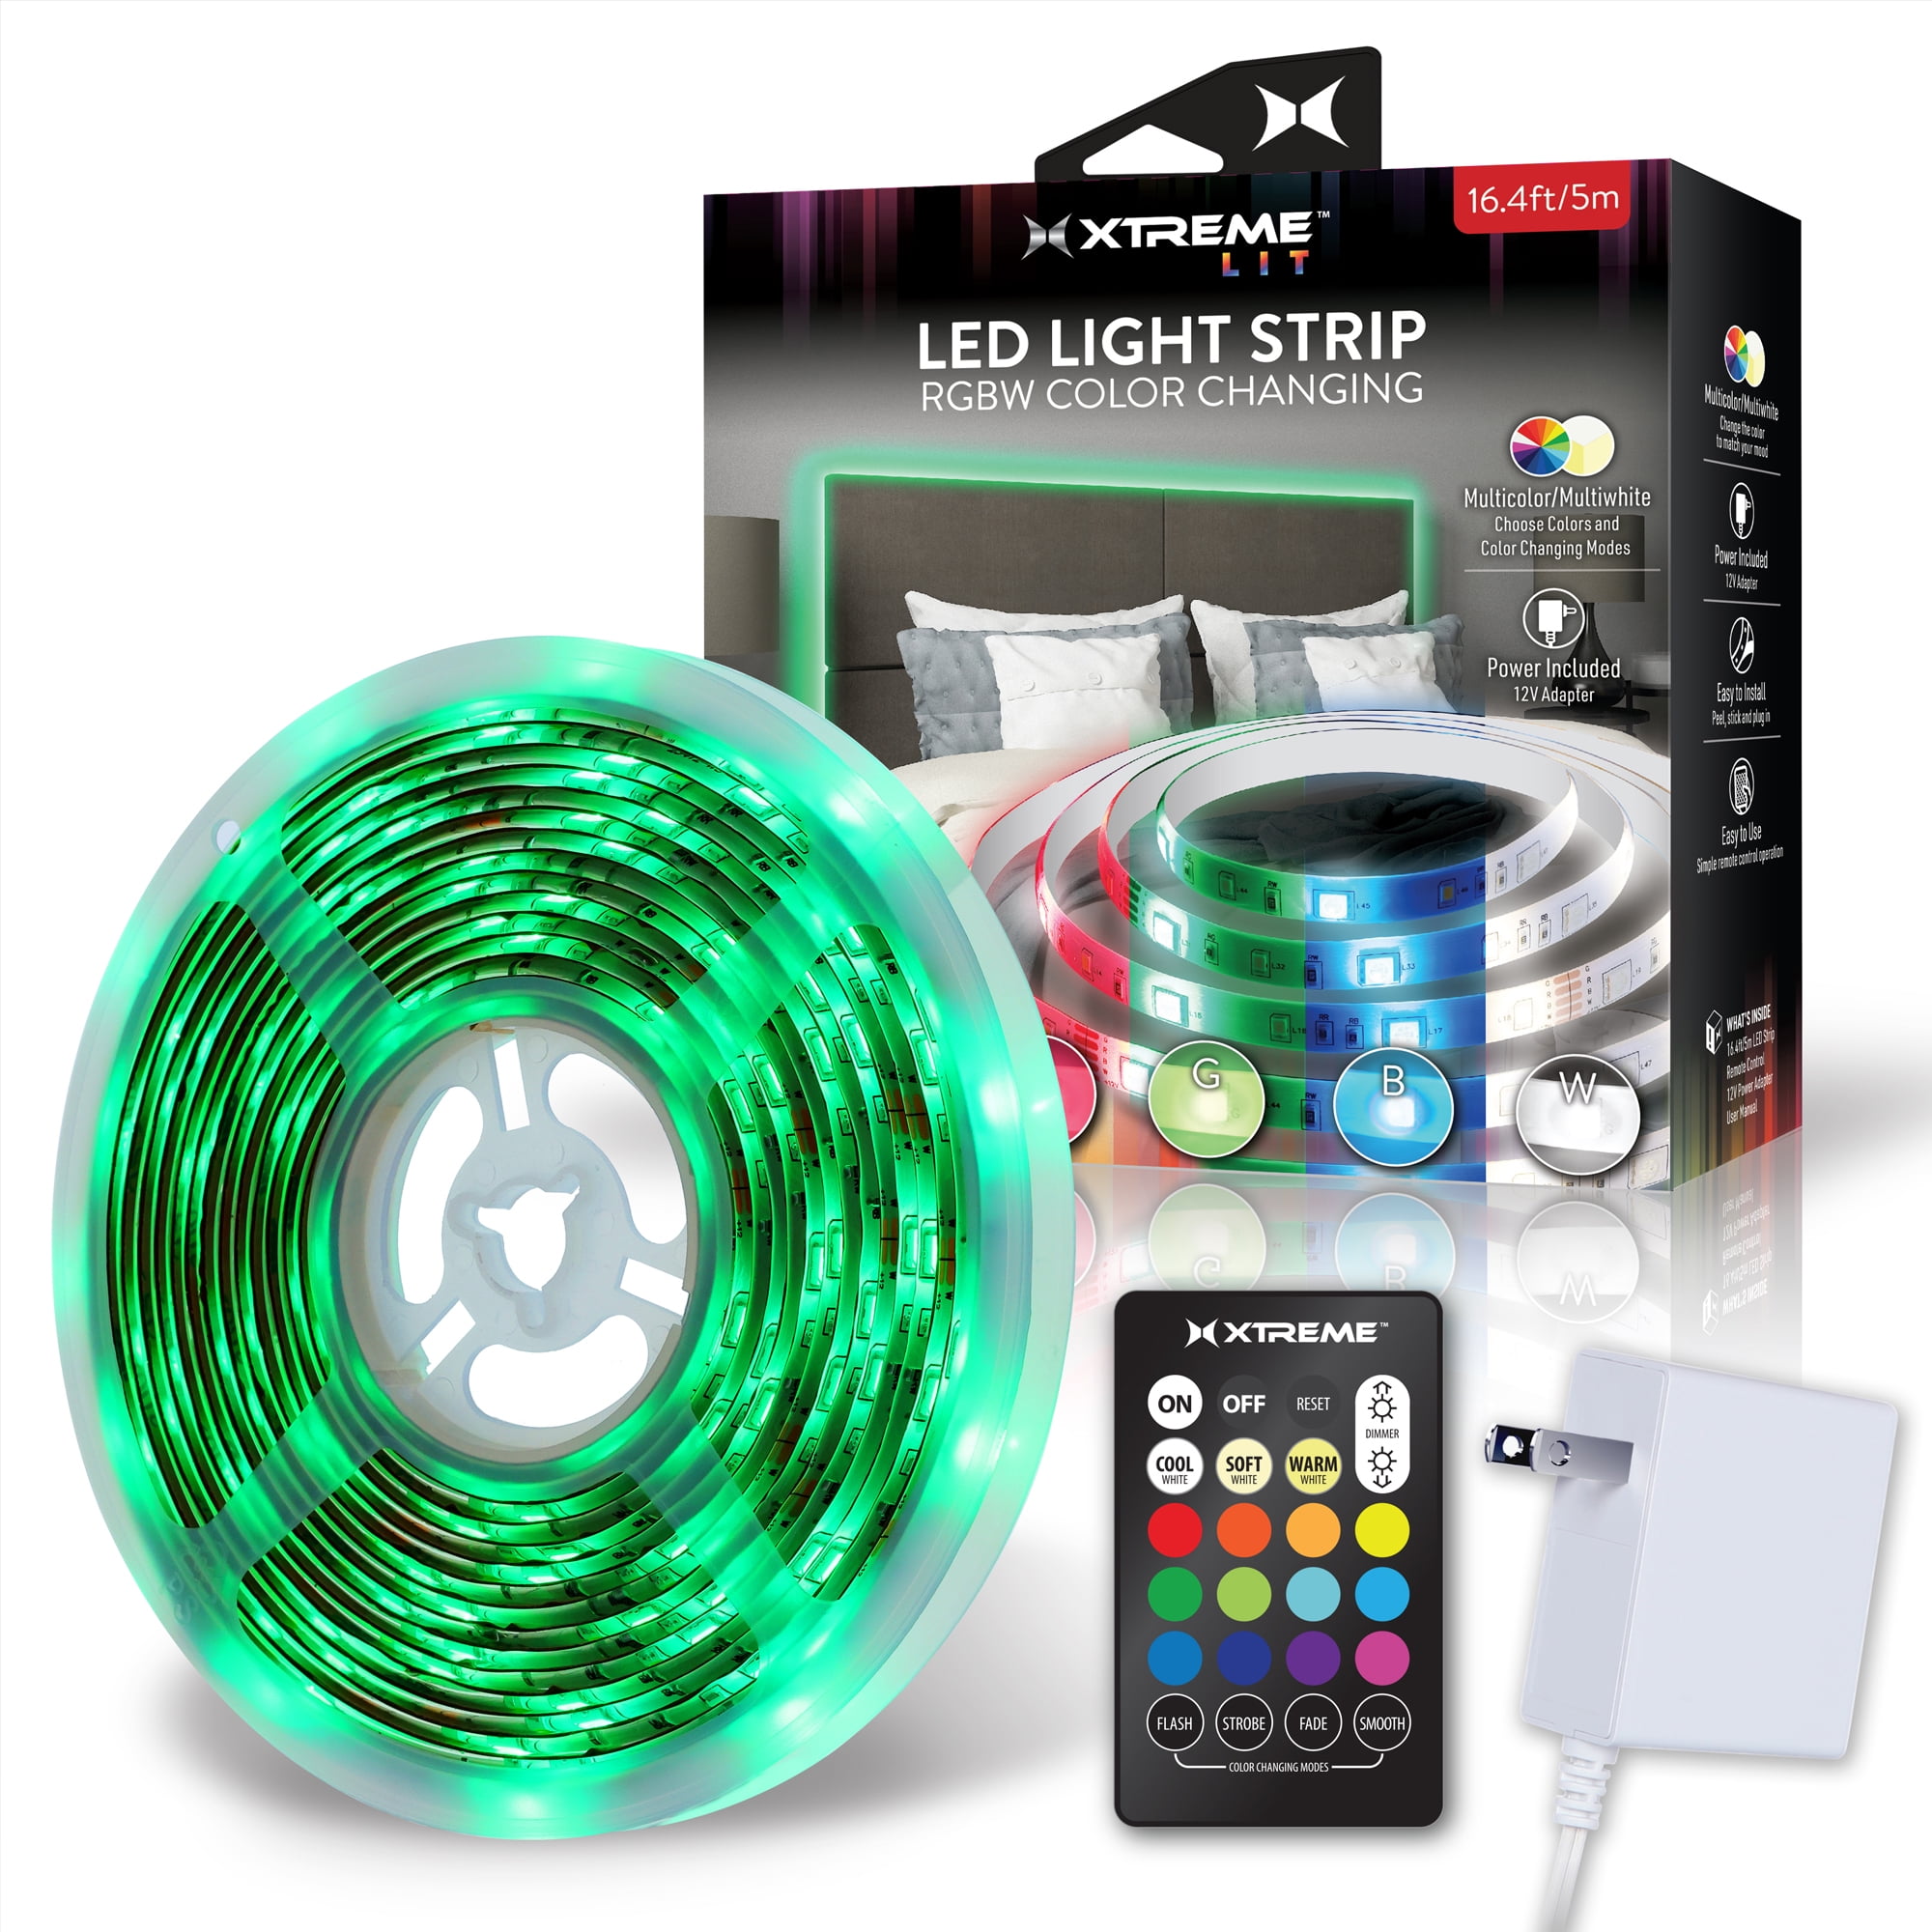 Xtreme Lit 32.8ft RGBW Color-Changing Indoor Light Strip, Remote Control, Powered by 12V Adapter - Walmart.com